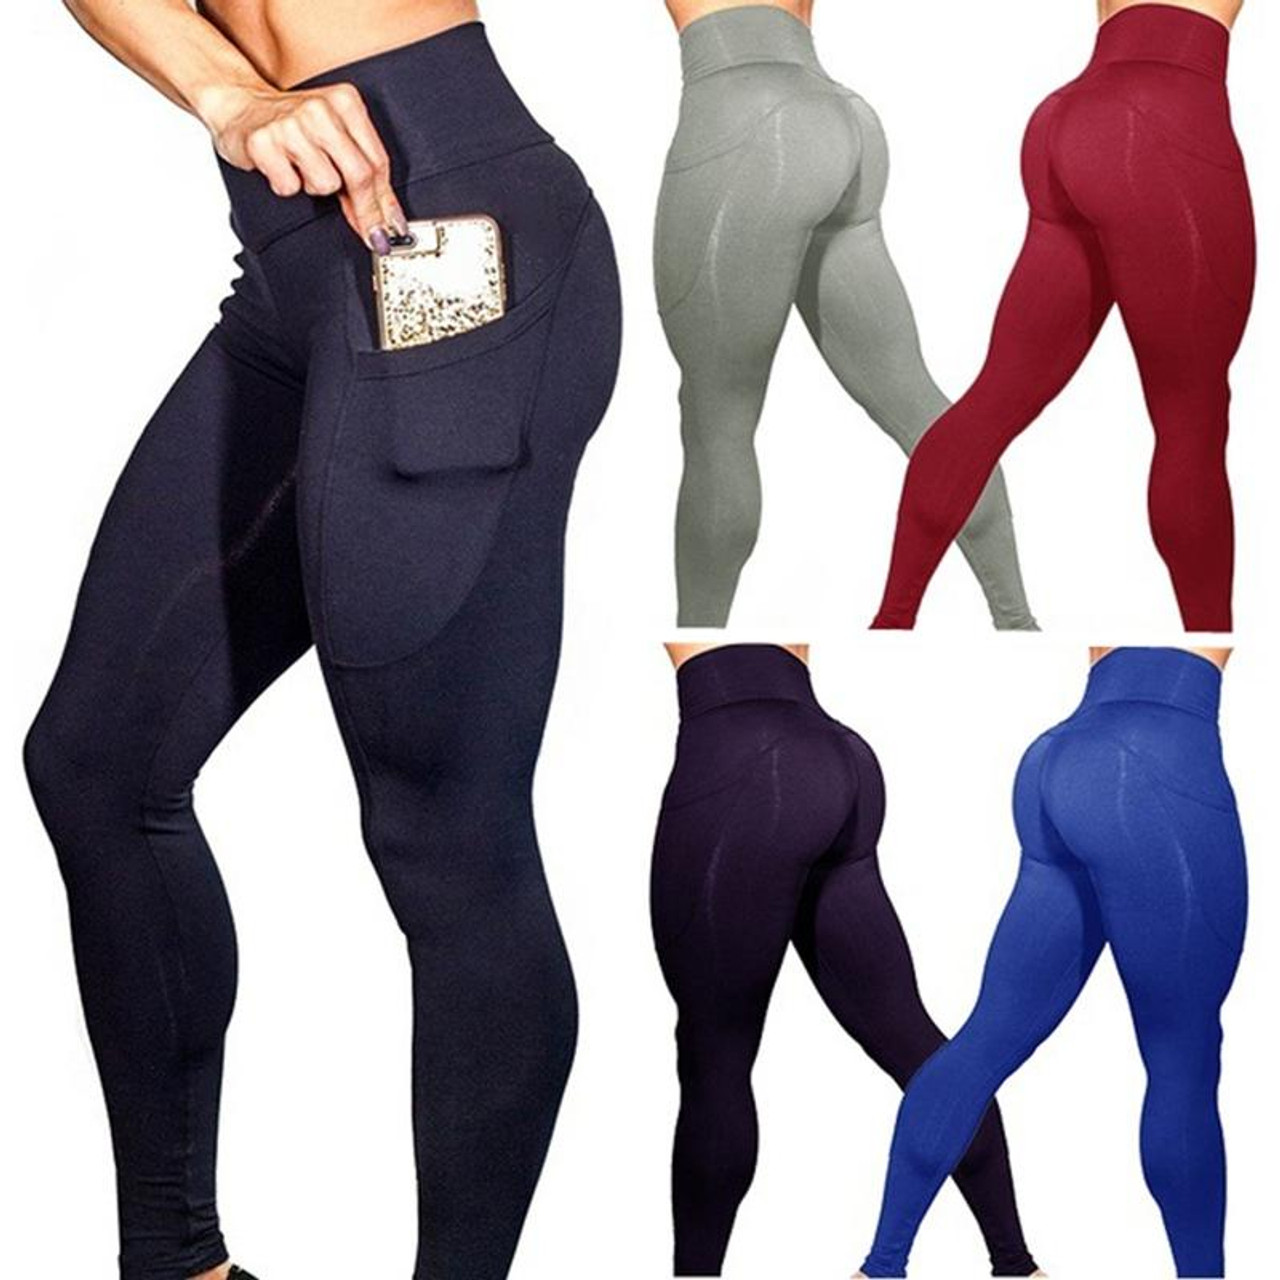 Women's High Waist Workout Yoga Pants Athletic Legging - Red / S